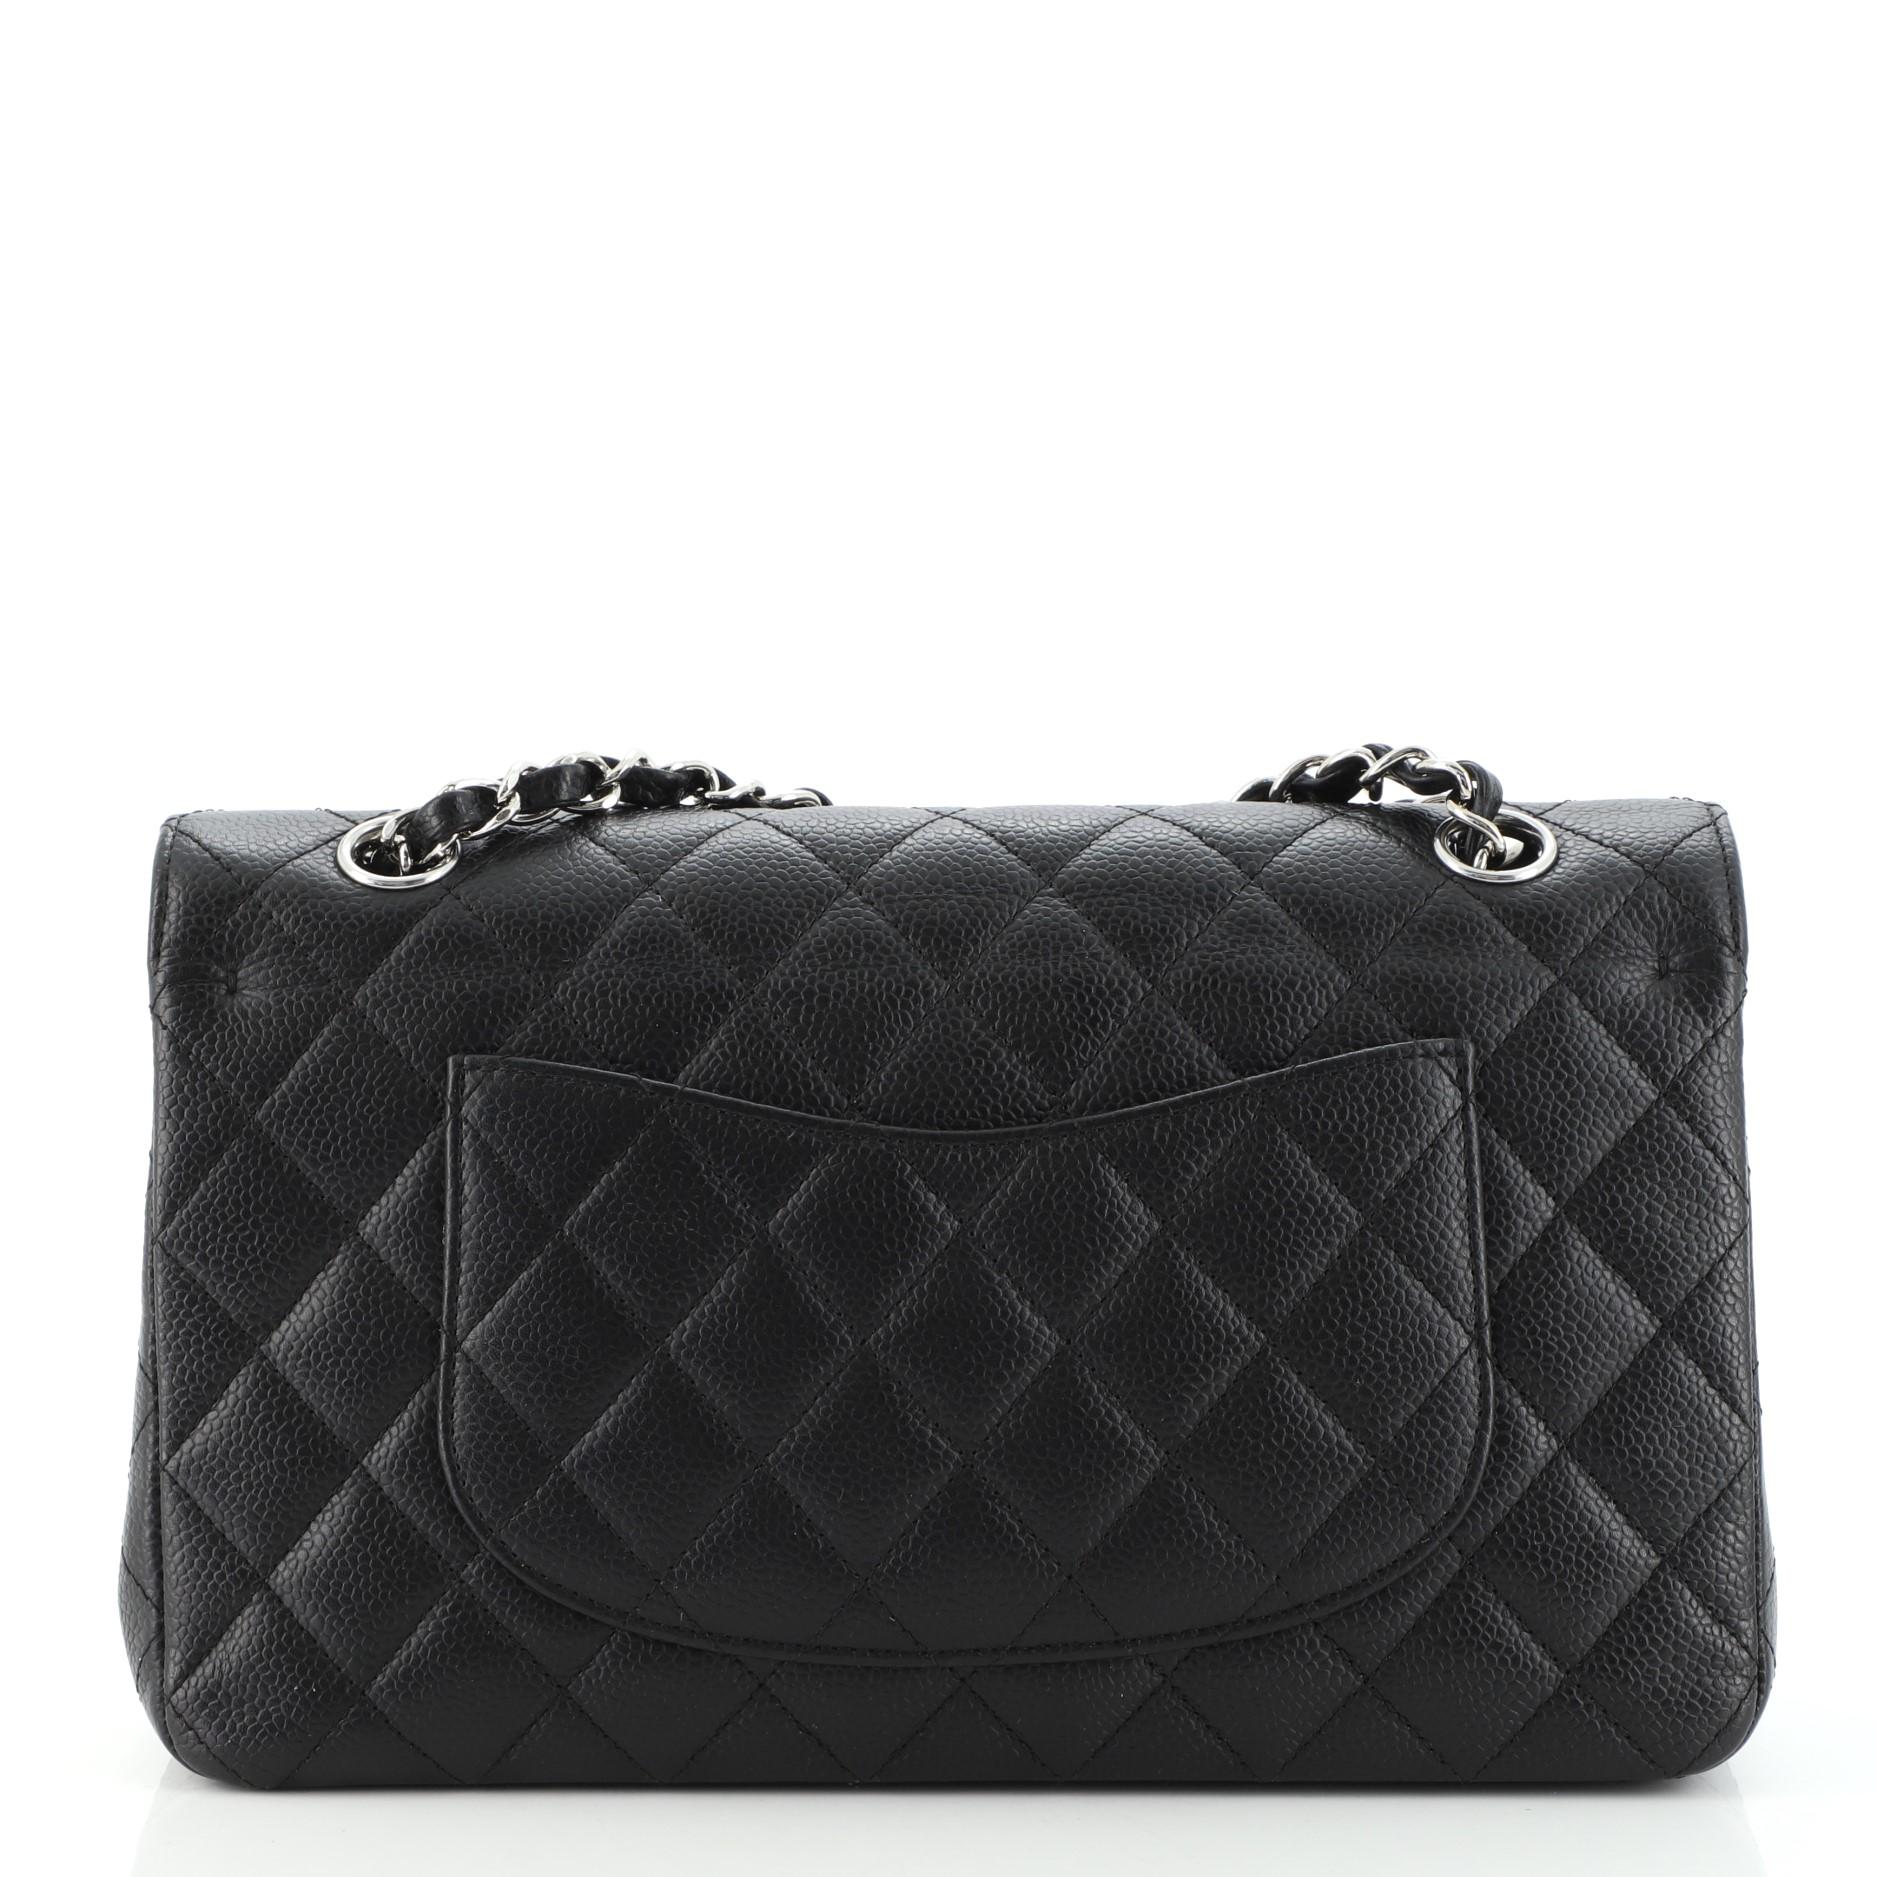 Black Chanel Vintage Classic Double Flap Bag Quilted Caviar Medium